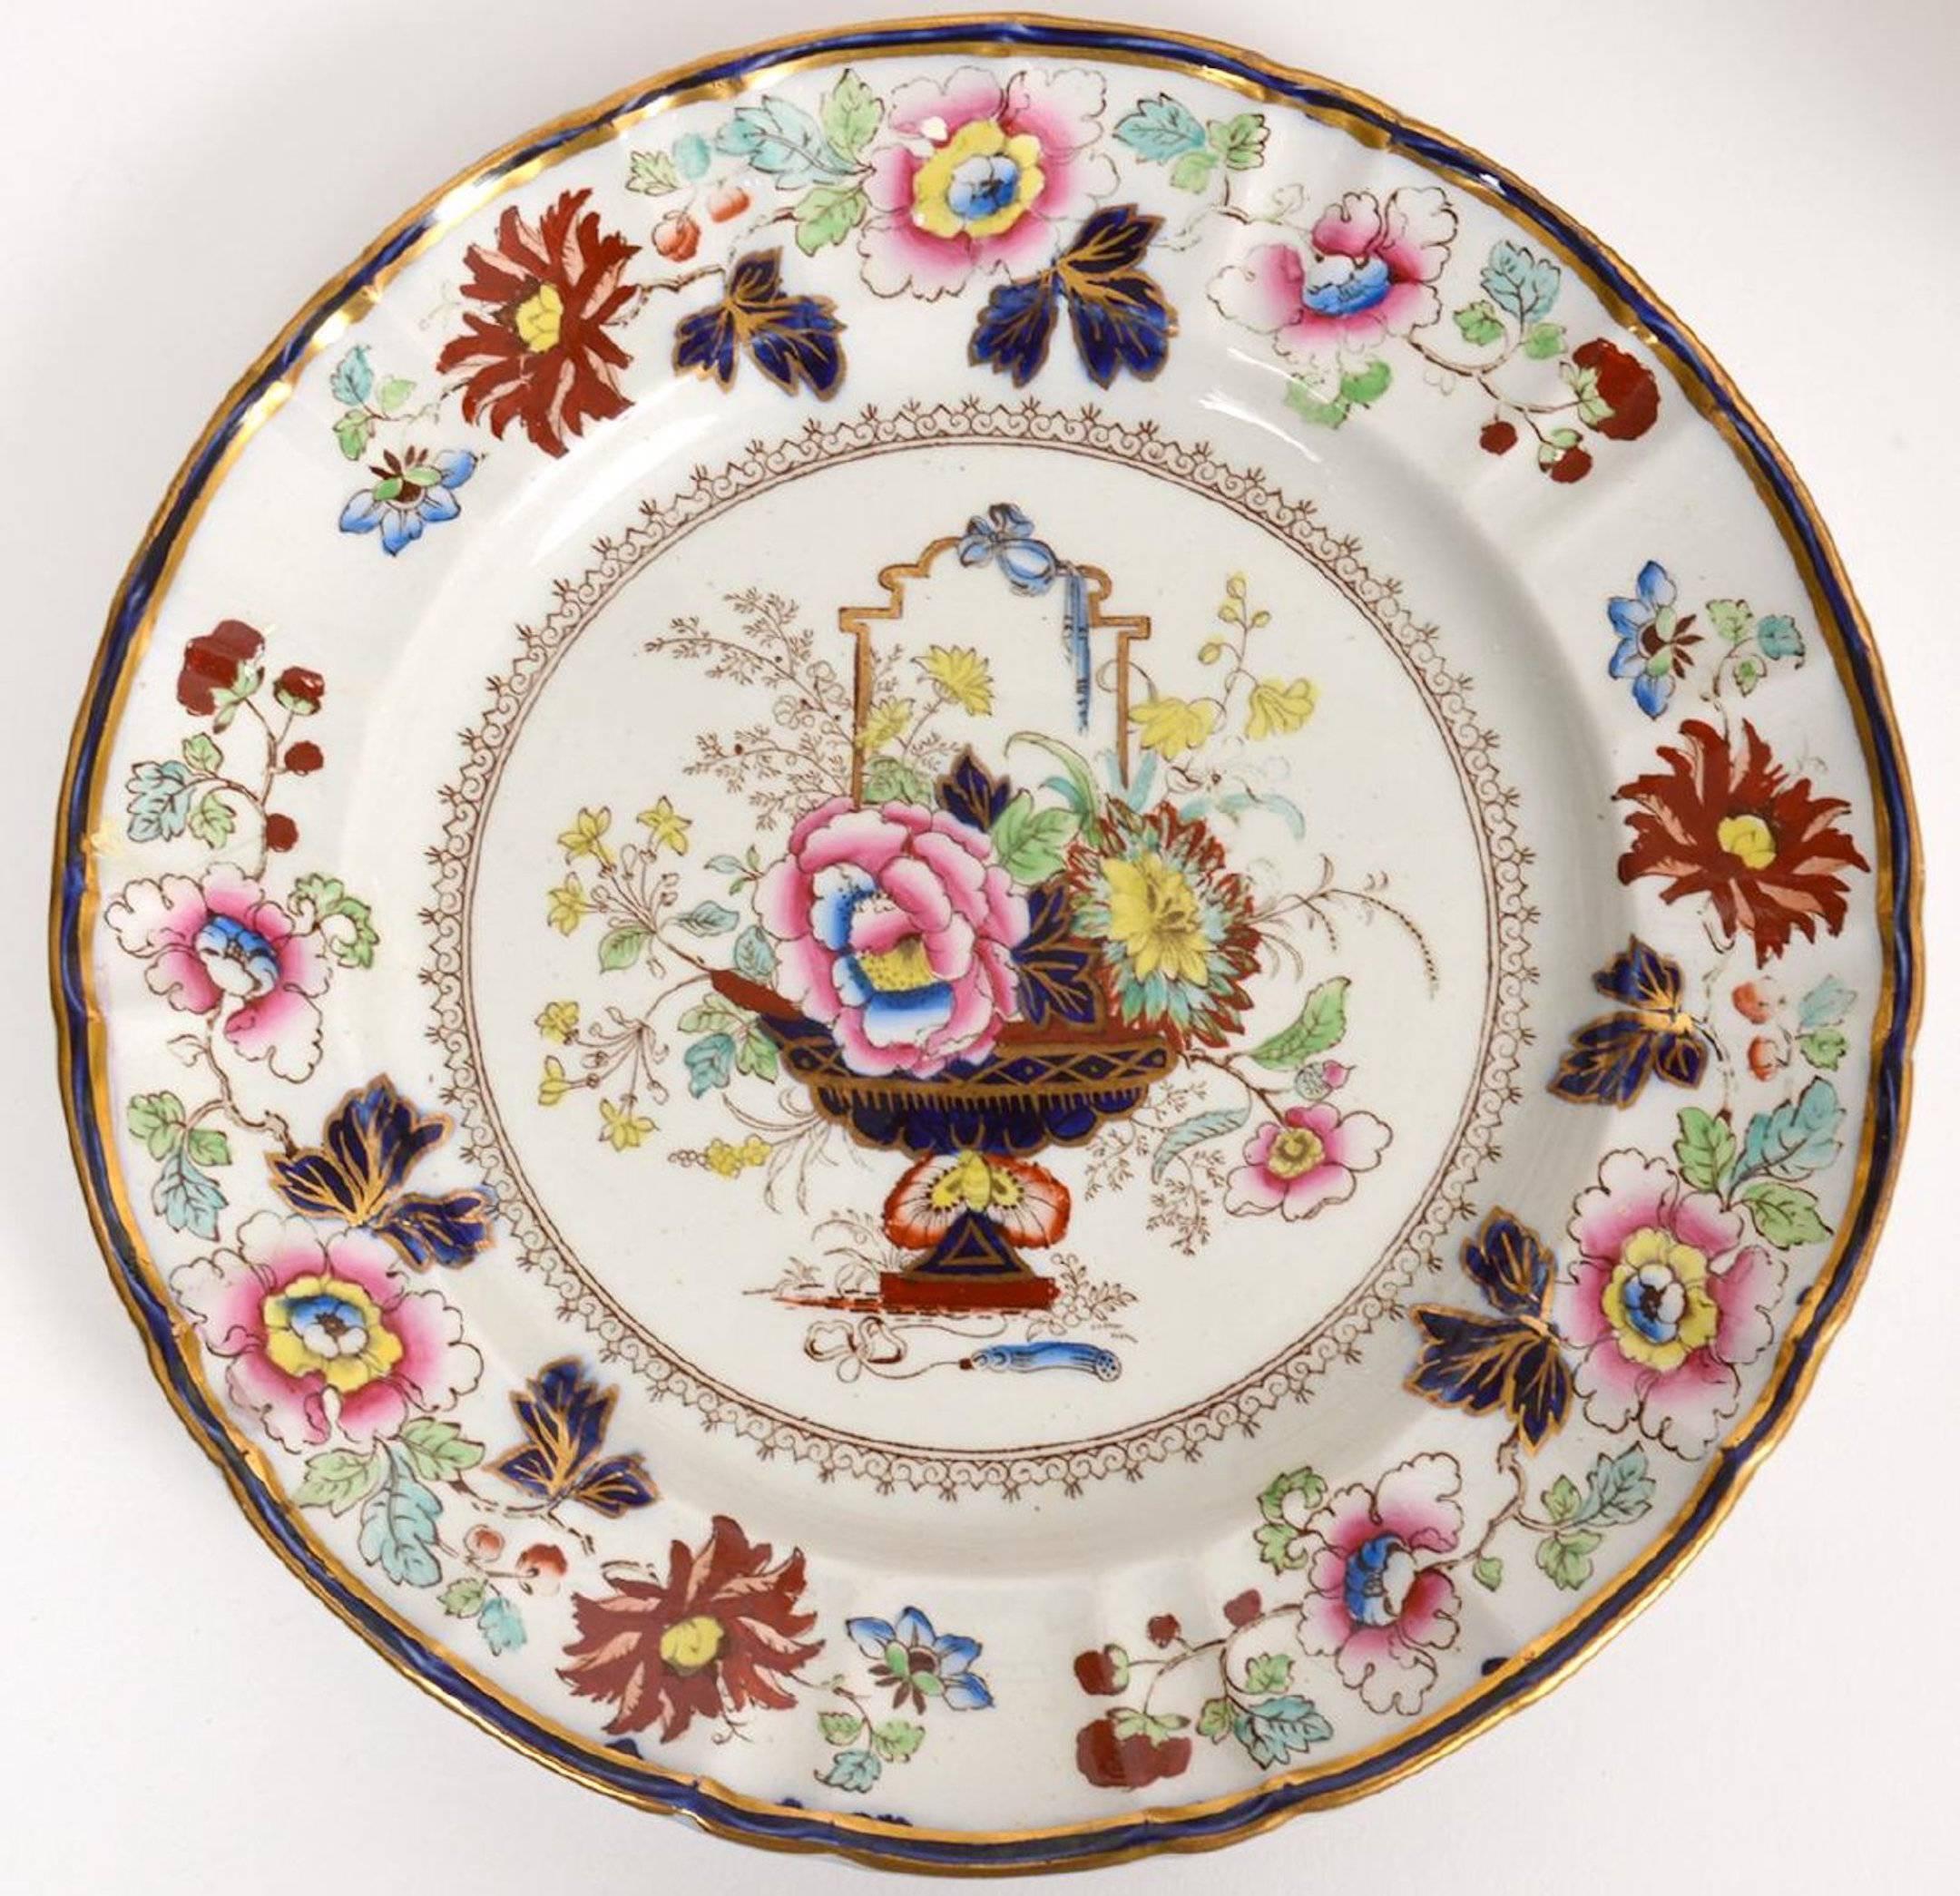 Eleven antique Masons ironstone dinner plates, in the Chinese Taste, each one decorated with a centre floral bouquet.